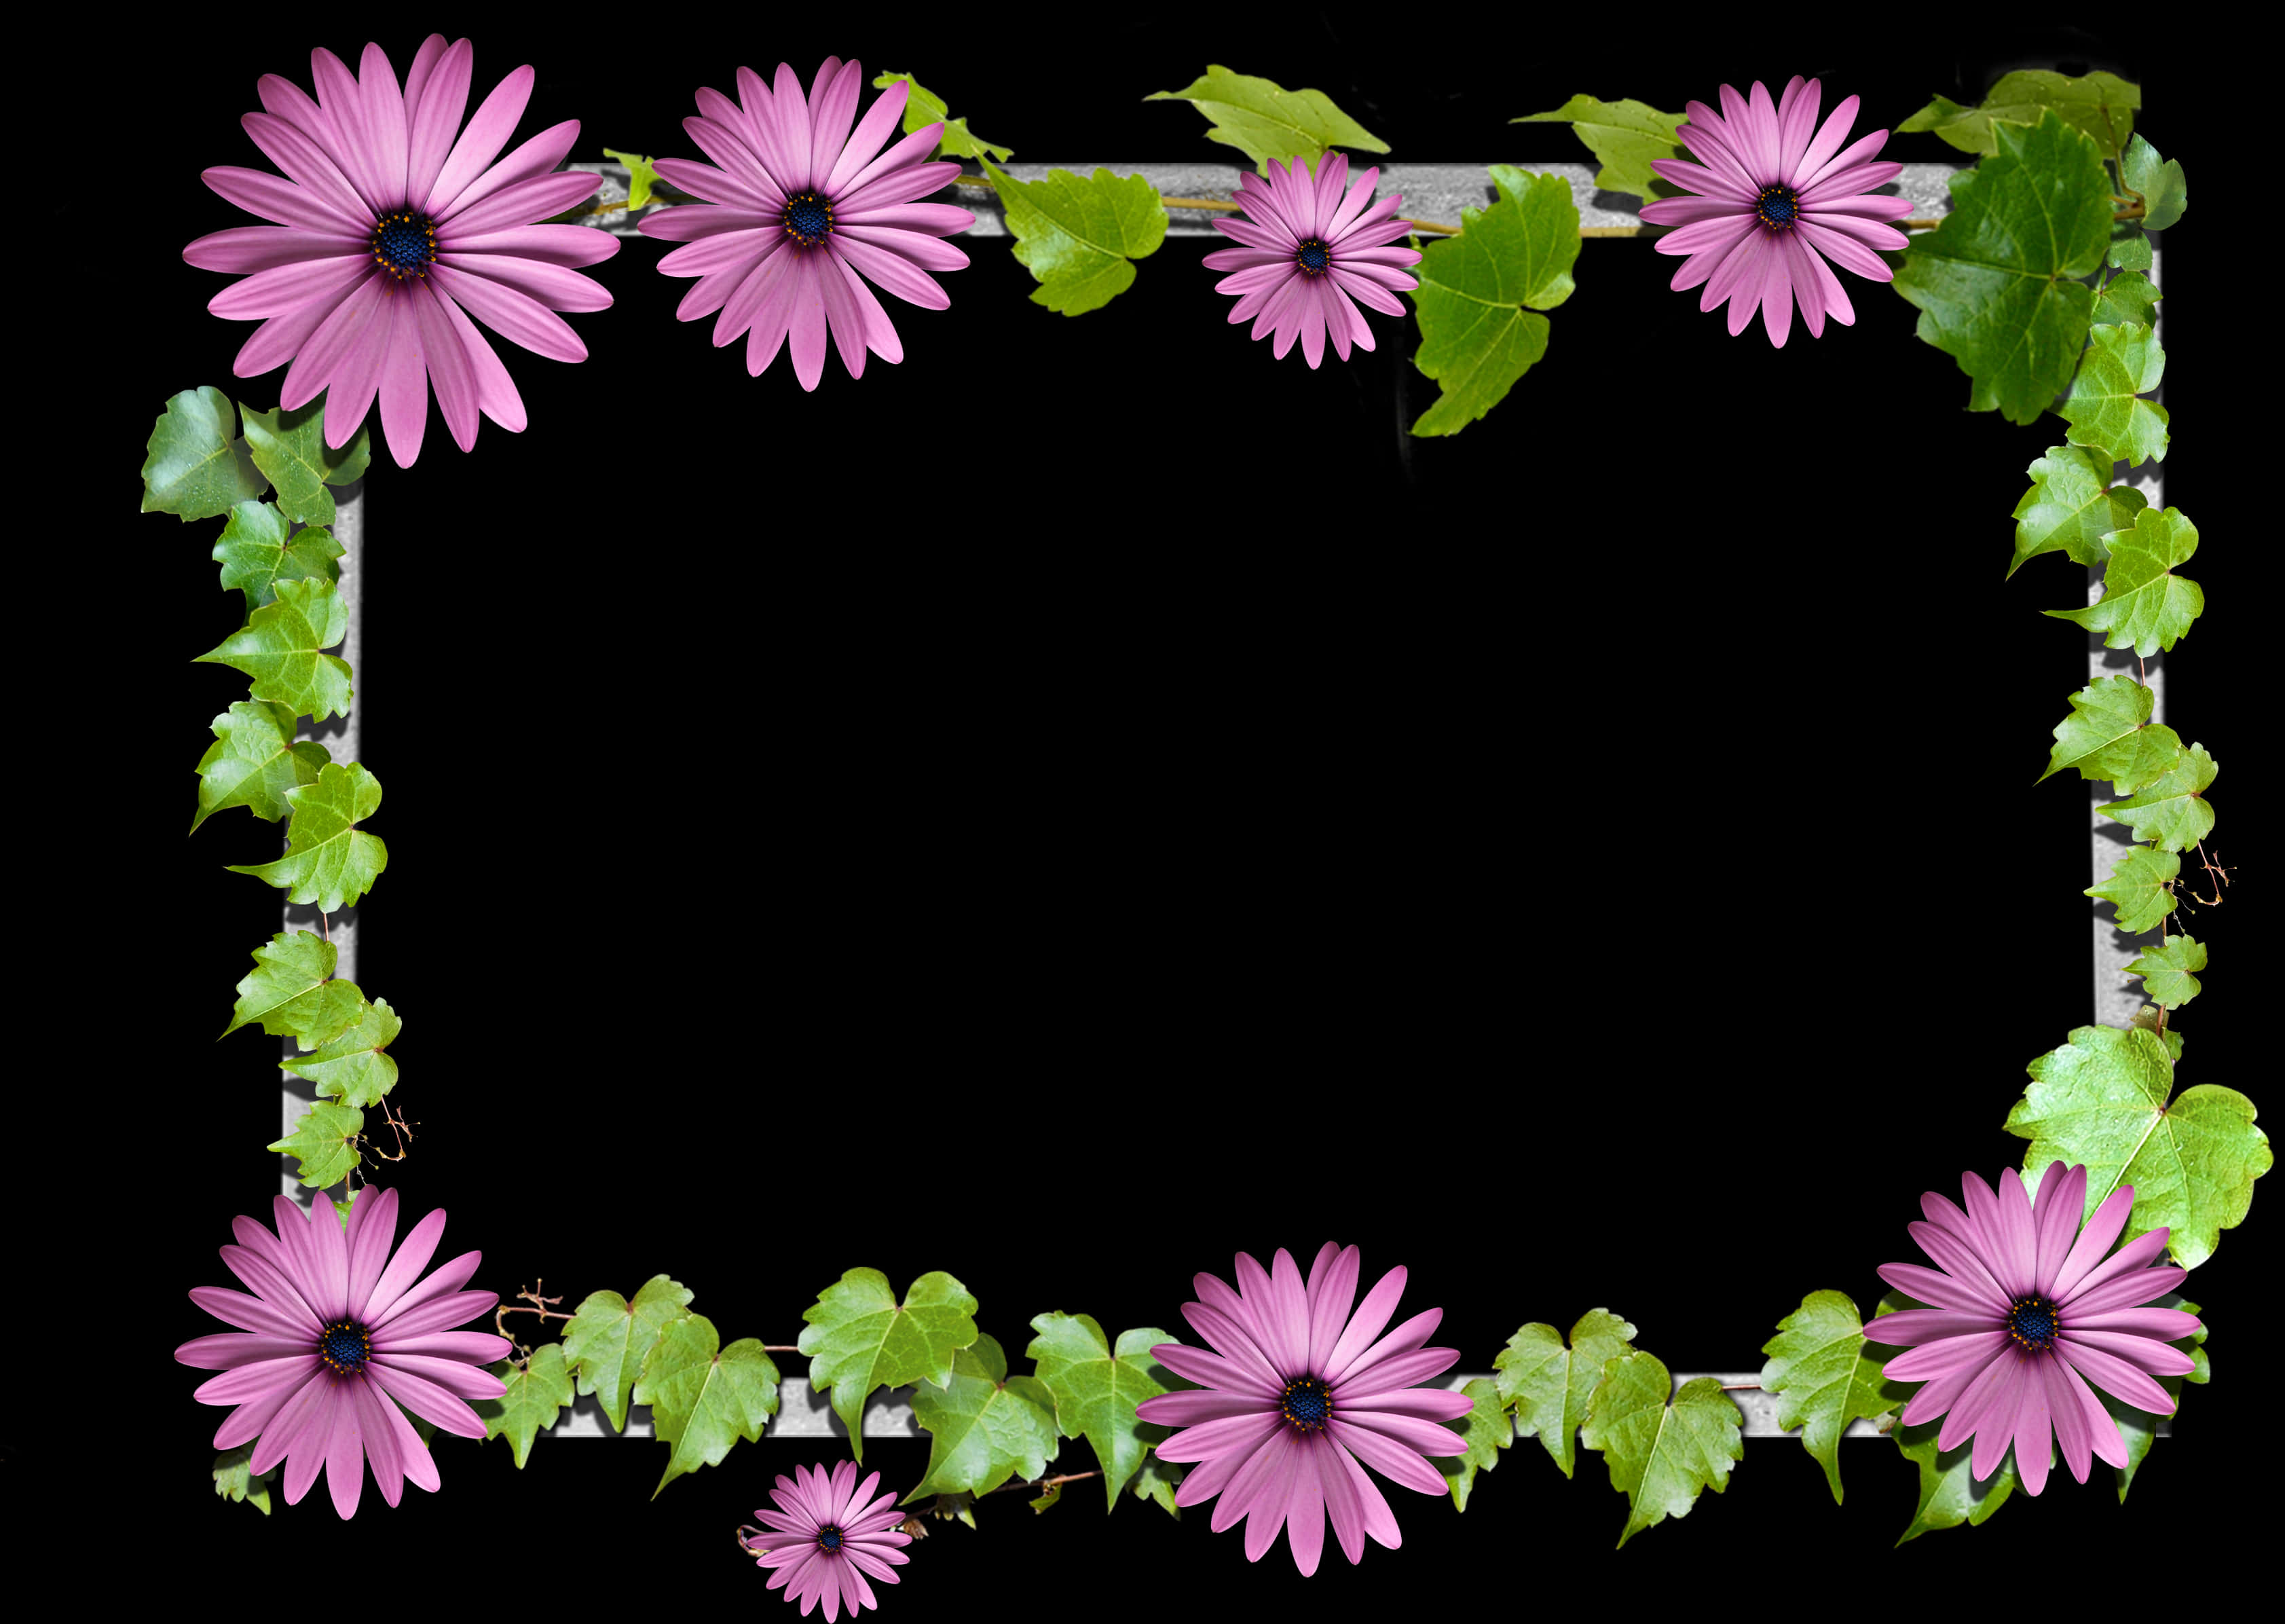 A Frame Of Purple Flowers And Green Leaves